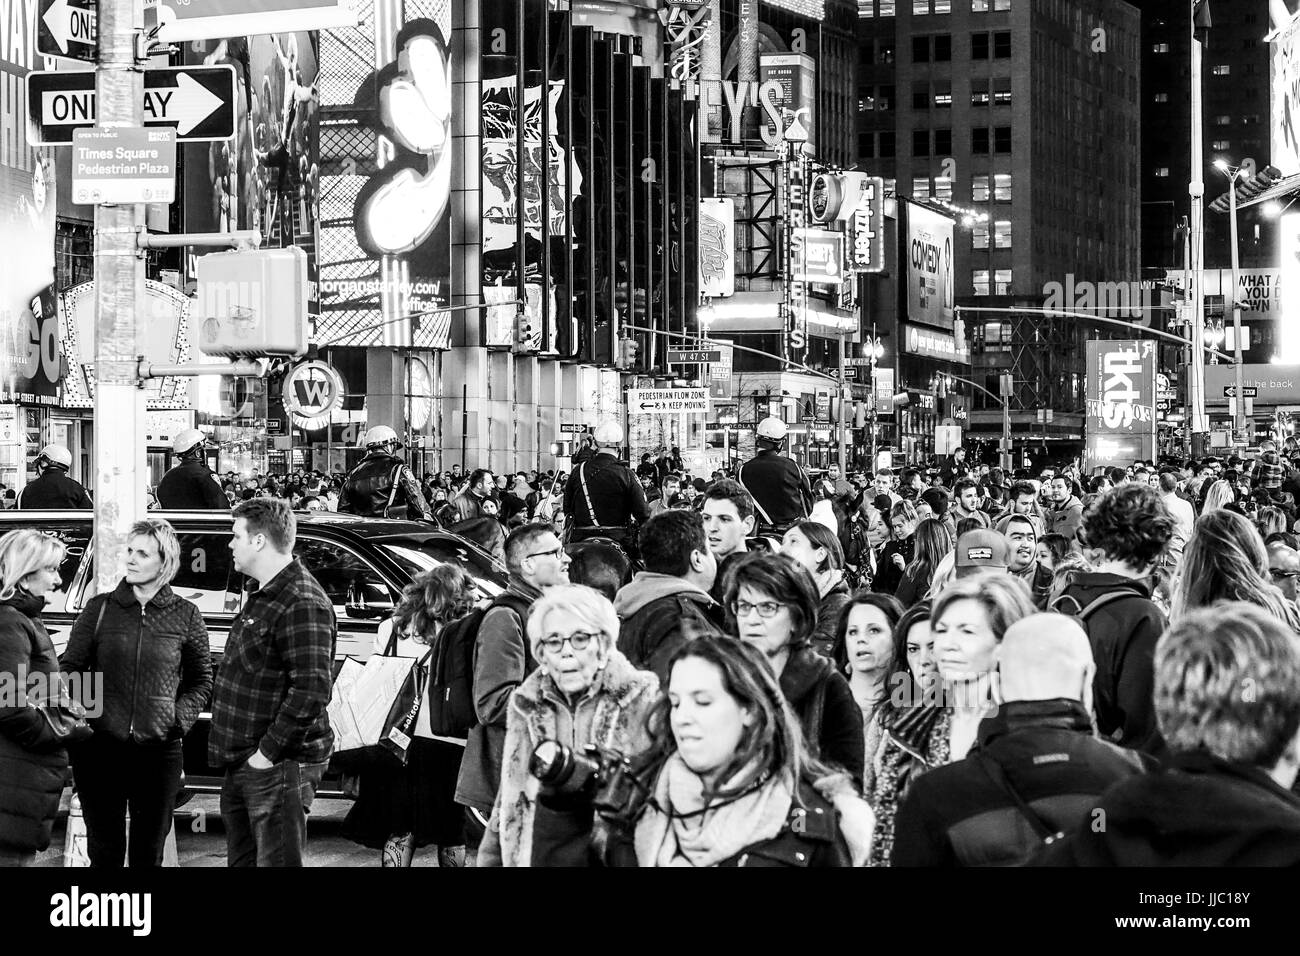 Manhattan Time Square - a crowded place - MANHATTAN - NEW YORK - APRIL 2 , 2017 Stock Photo